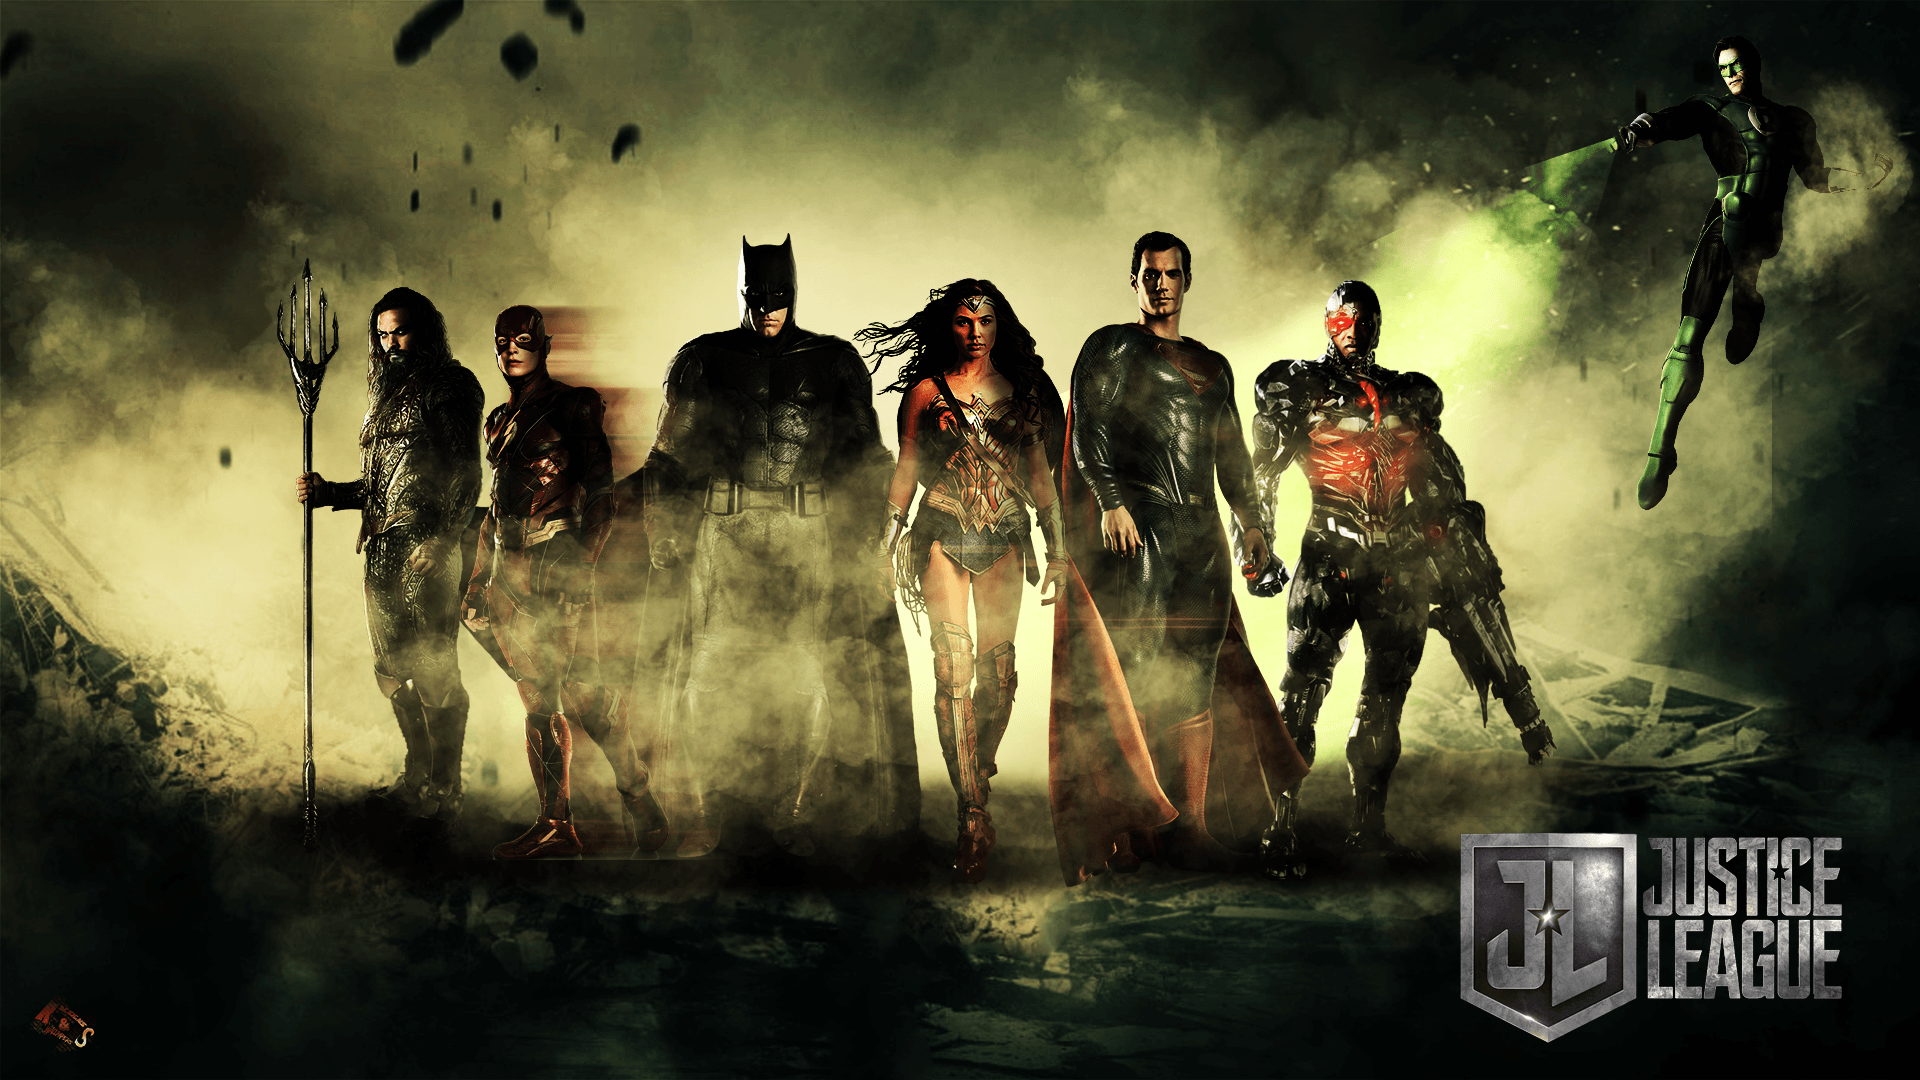 Justice League Wallpaper Full HD Pics By Rohitbasu On Of Androids